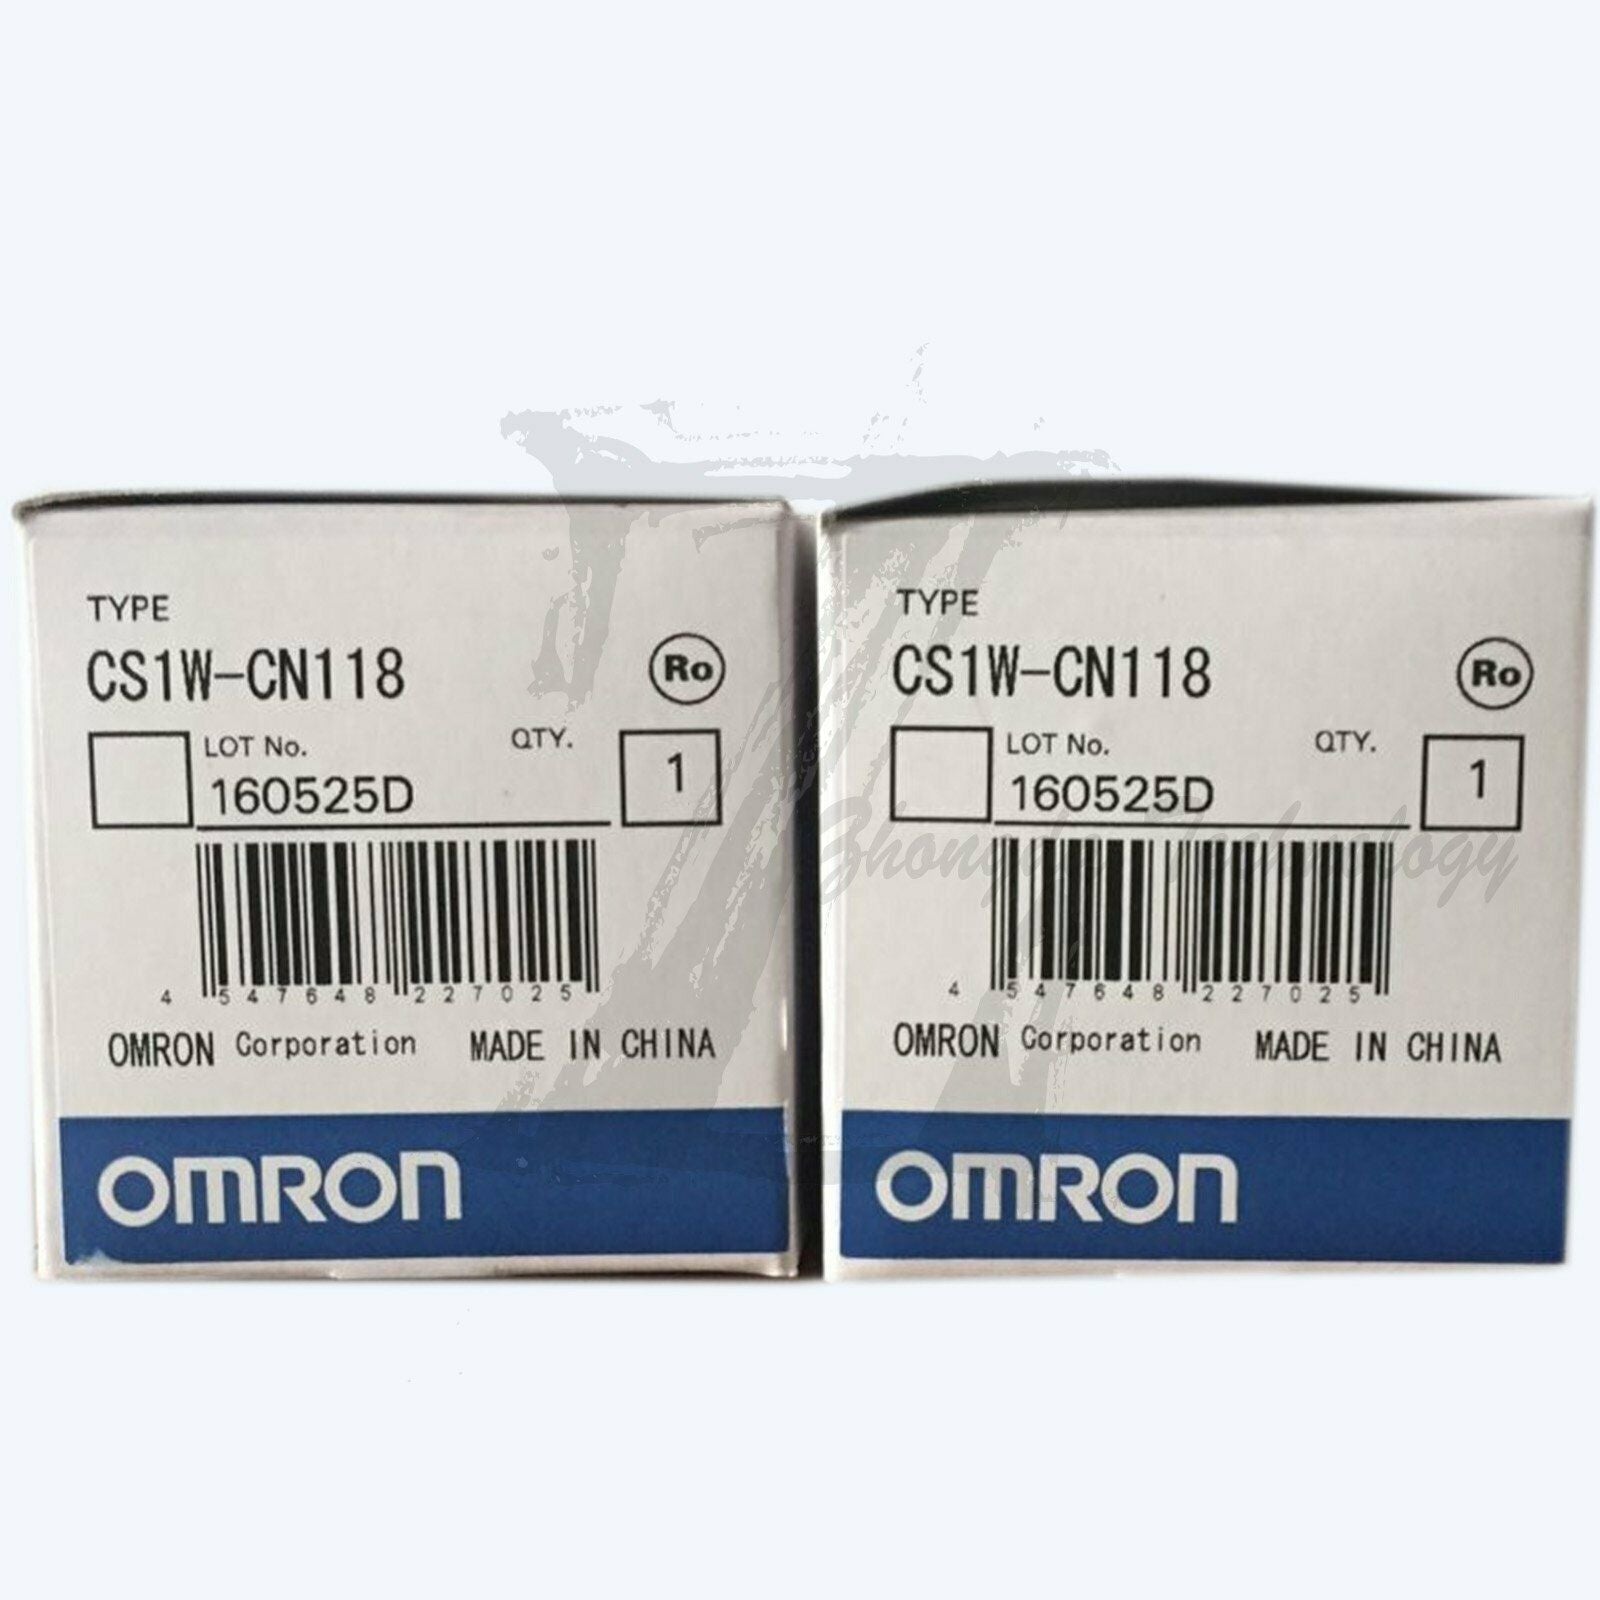 1pc new Omron CS1W-CN118 module one year warranty KOEED 101-200, 90%, import_2020_10_10_031751, Omron, Other